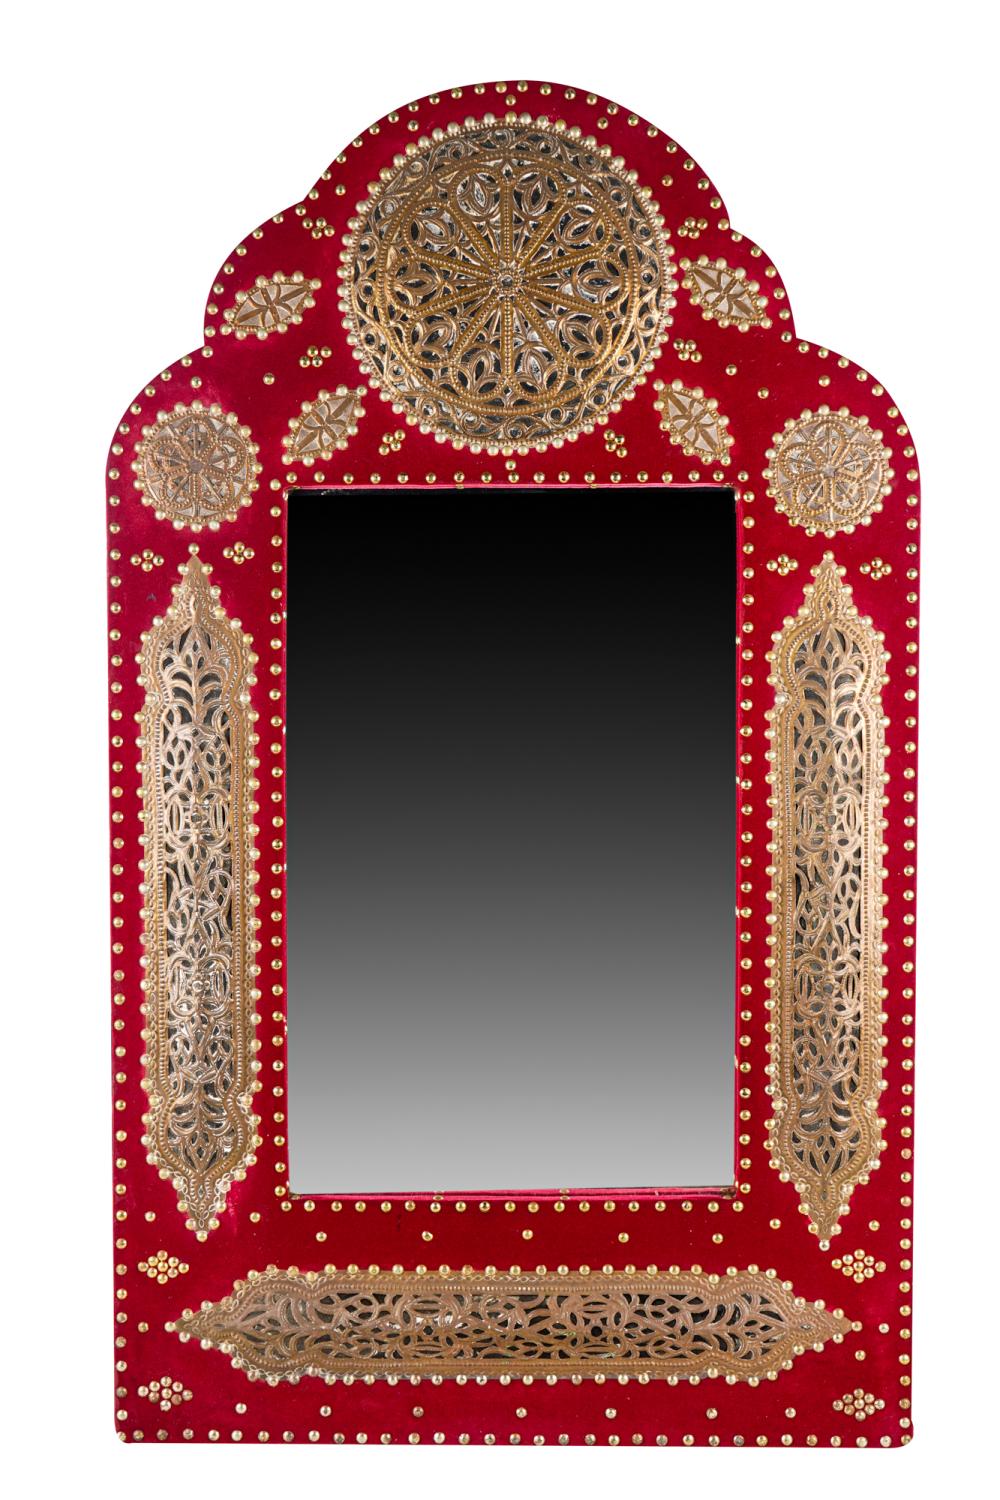 NORTH AFRICAN DECORATED MIRRORwith